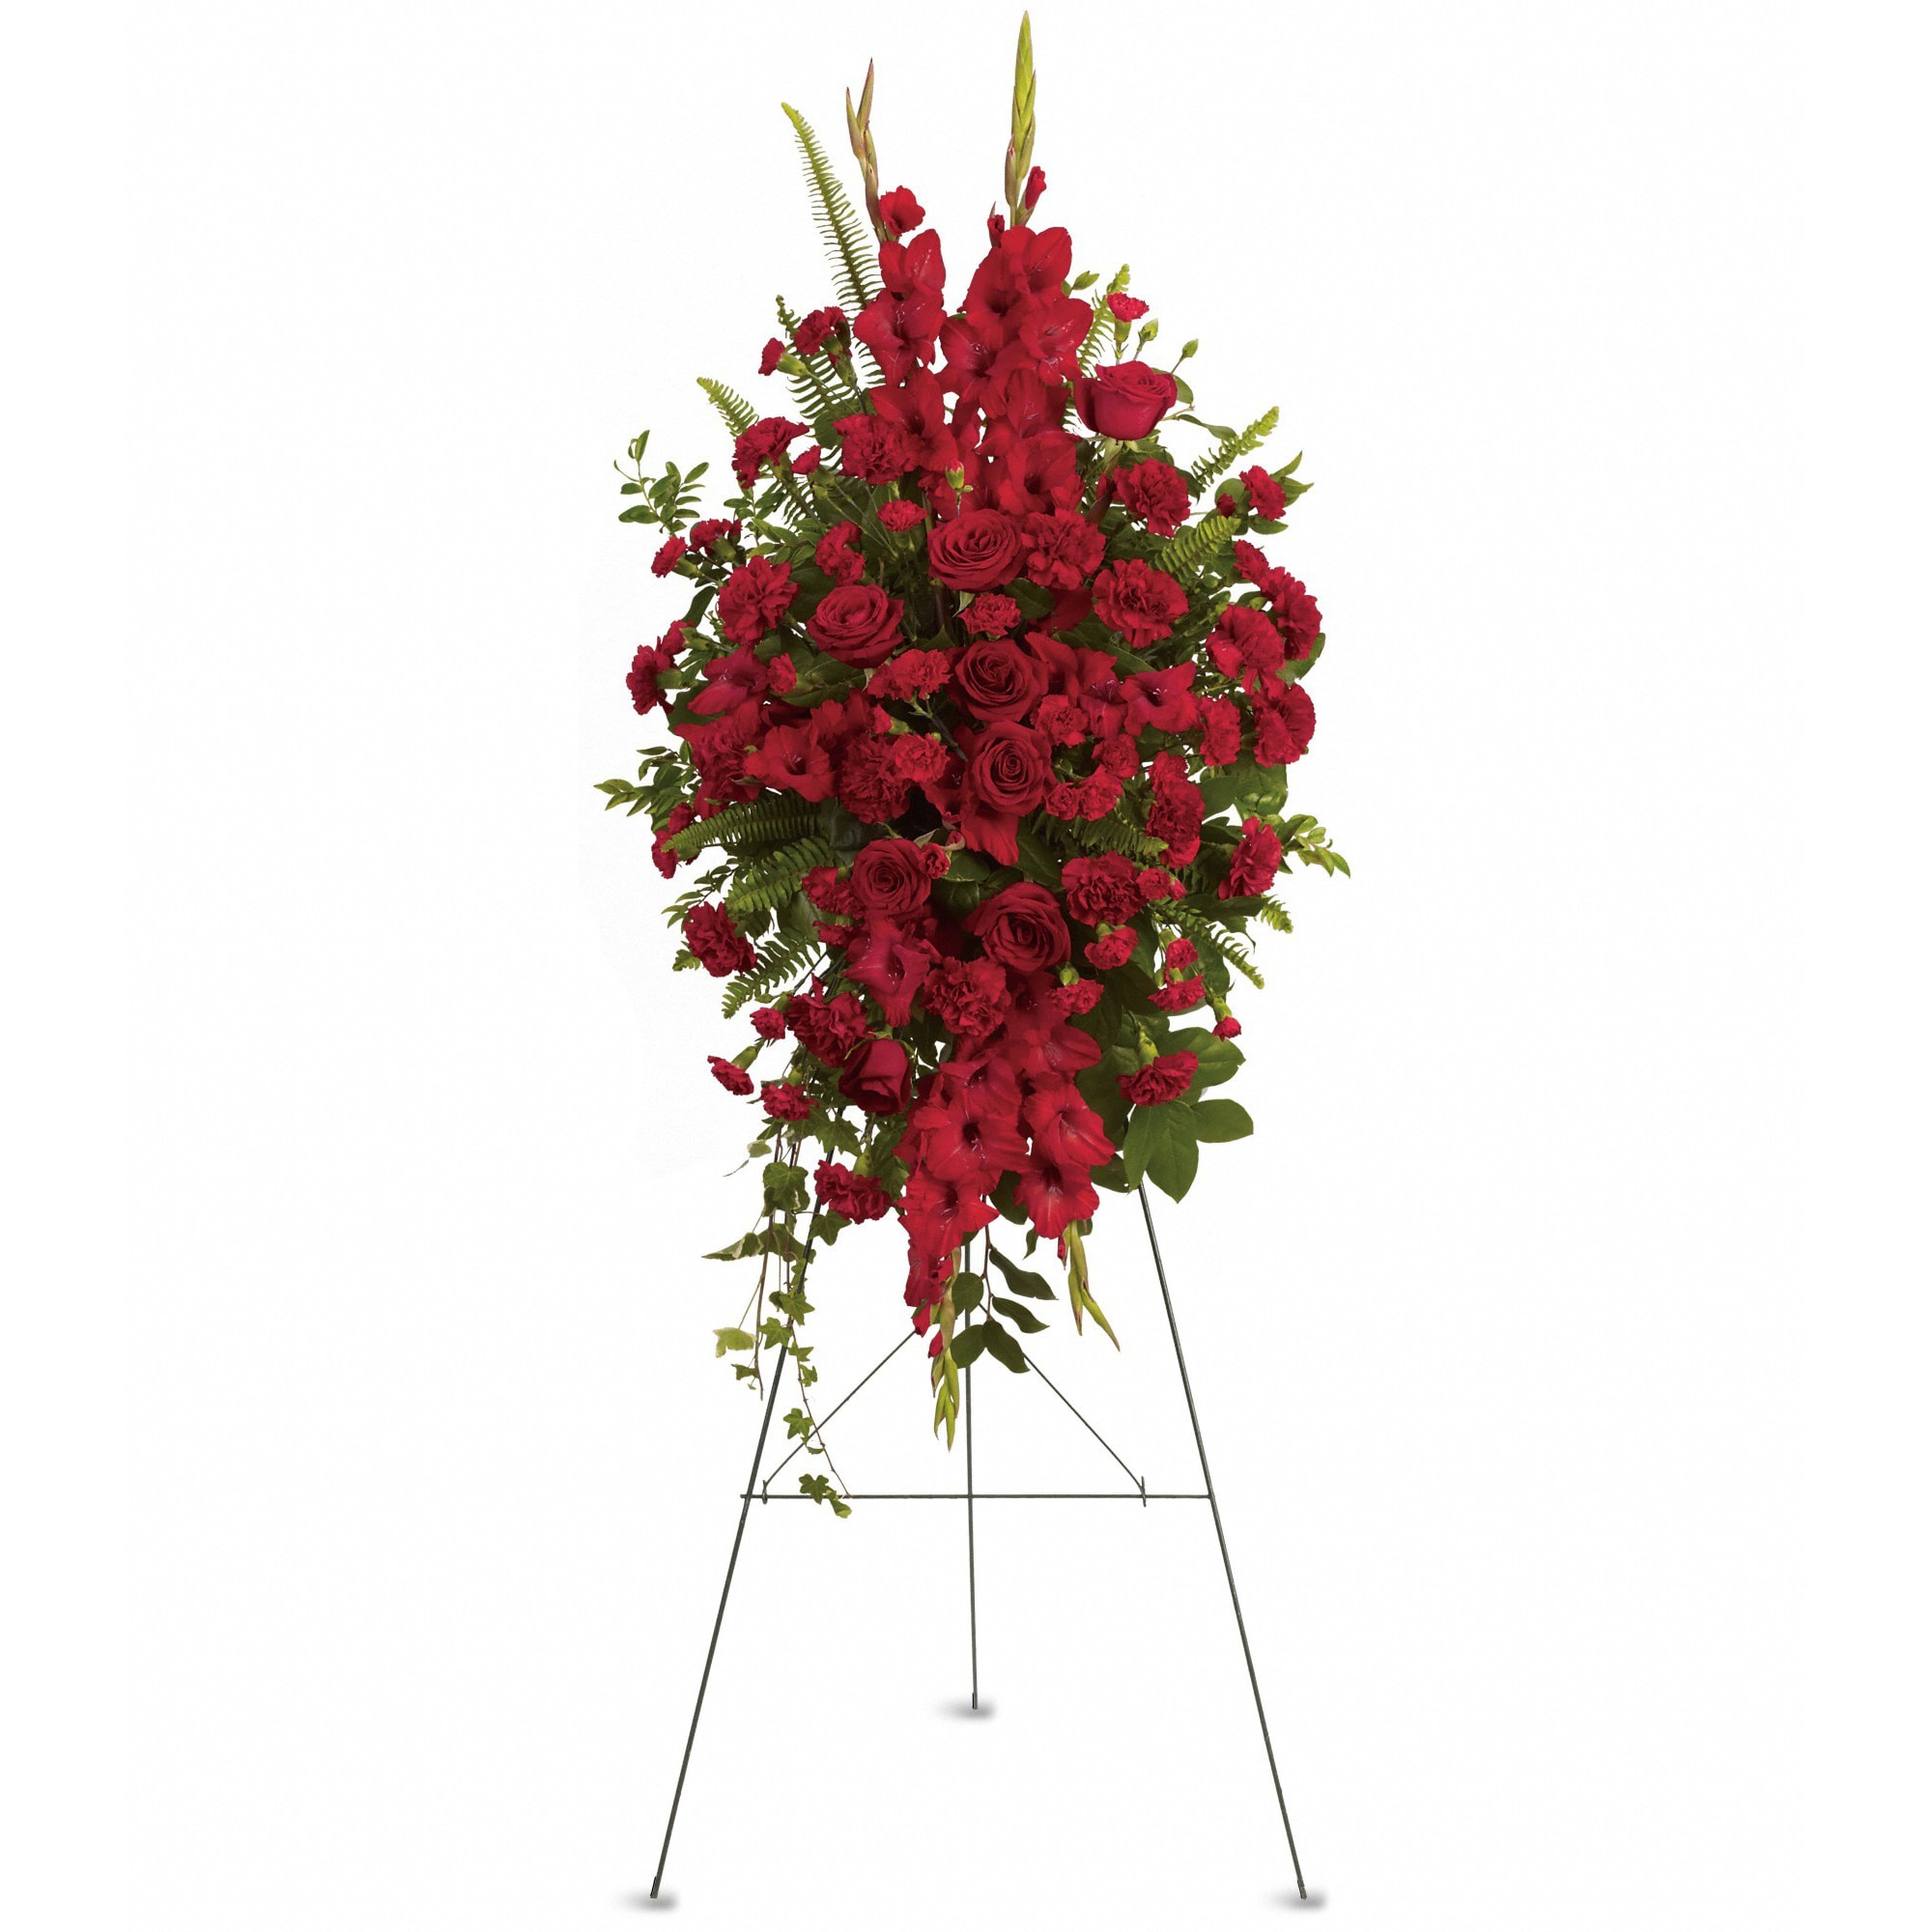 Deep in Our Hearts Spray by Teleflora - This rich, radiant spray of red roses, gladioli and other popular red flowers during a time of loss conveys a message of reassurance and hope in a difficult time.  